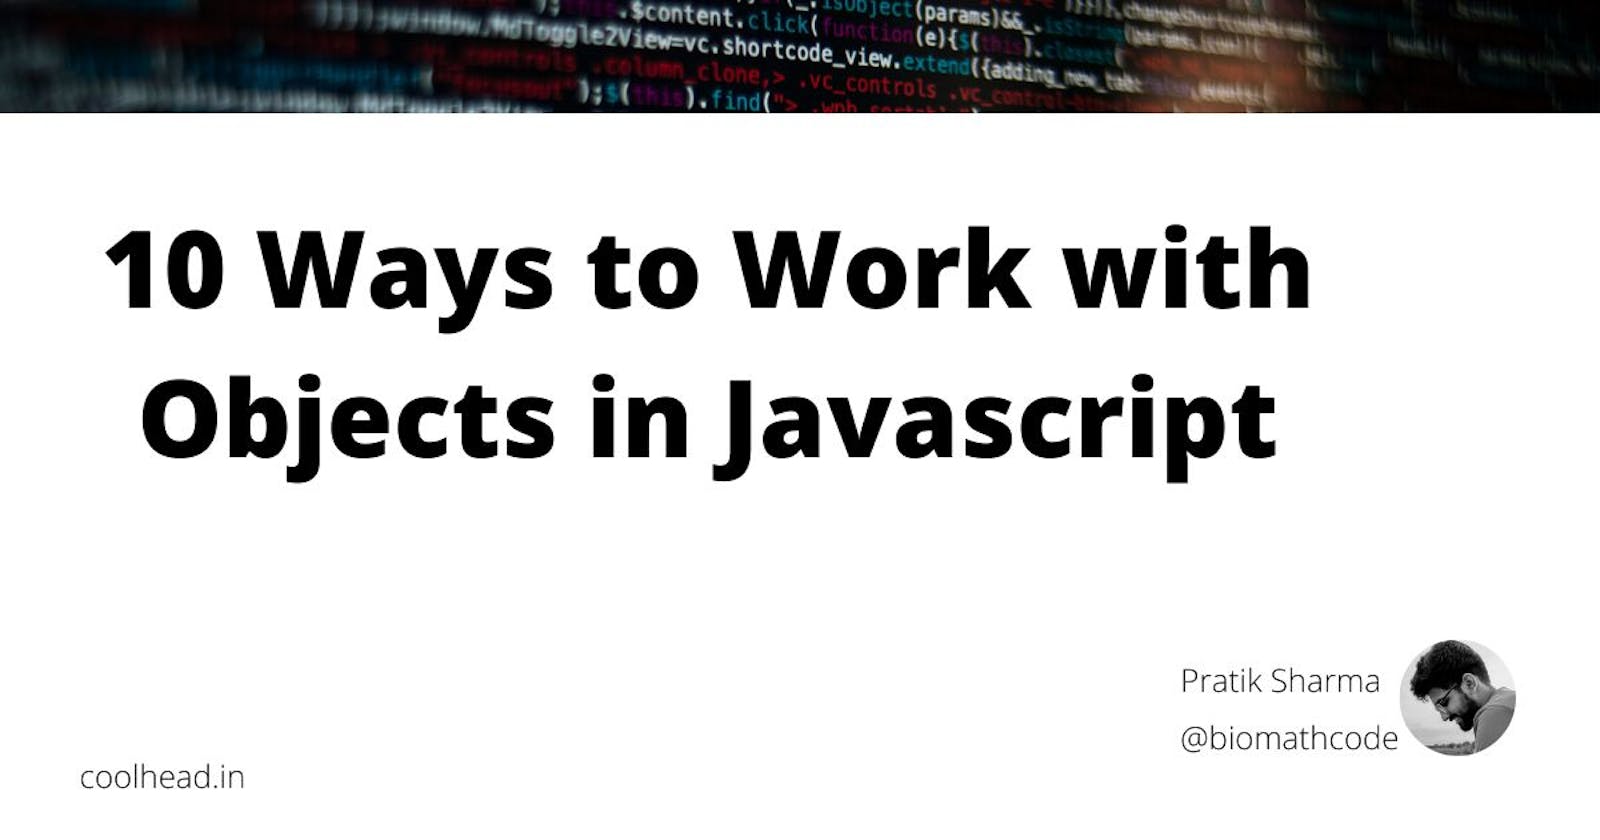 10 Ways to Work with Objects in Javascript